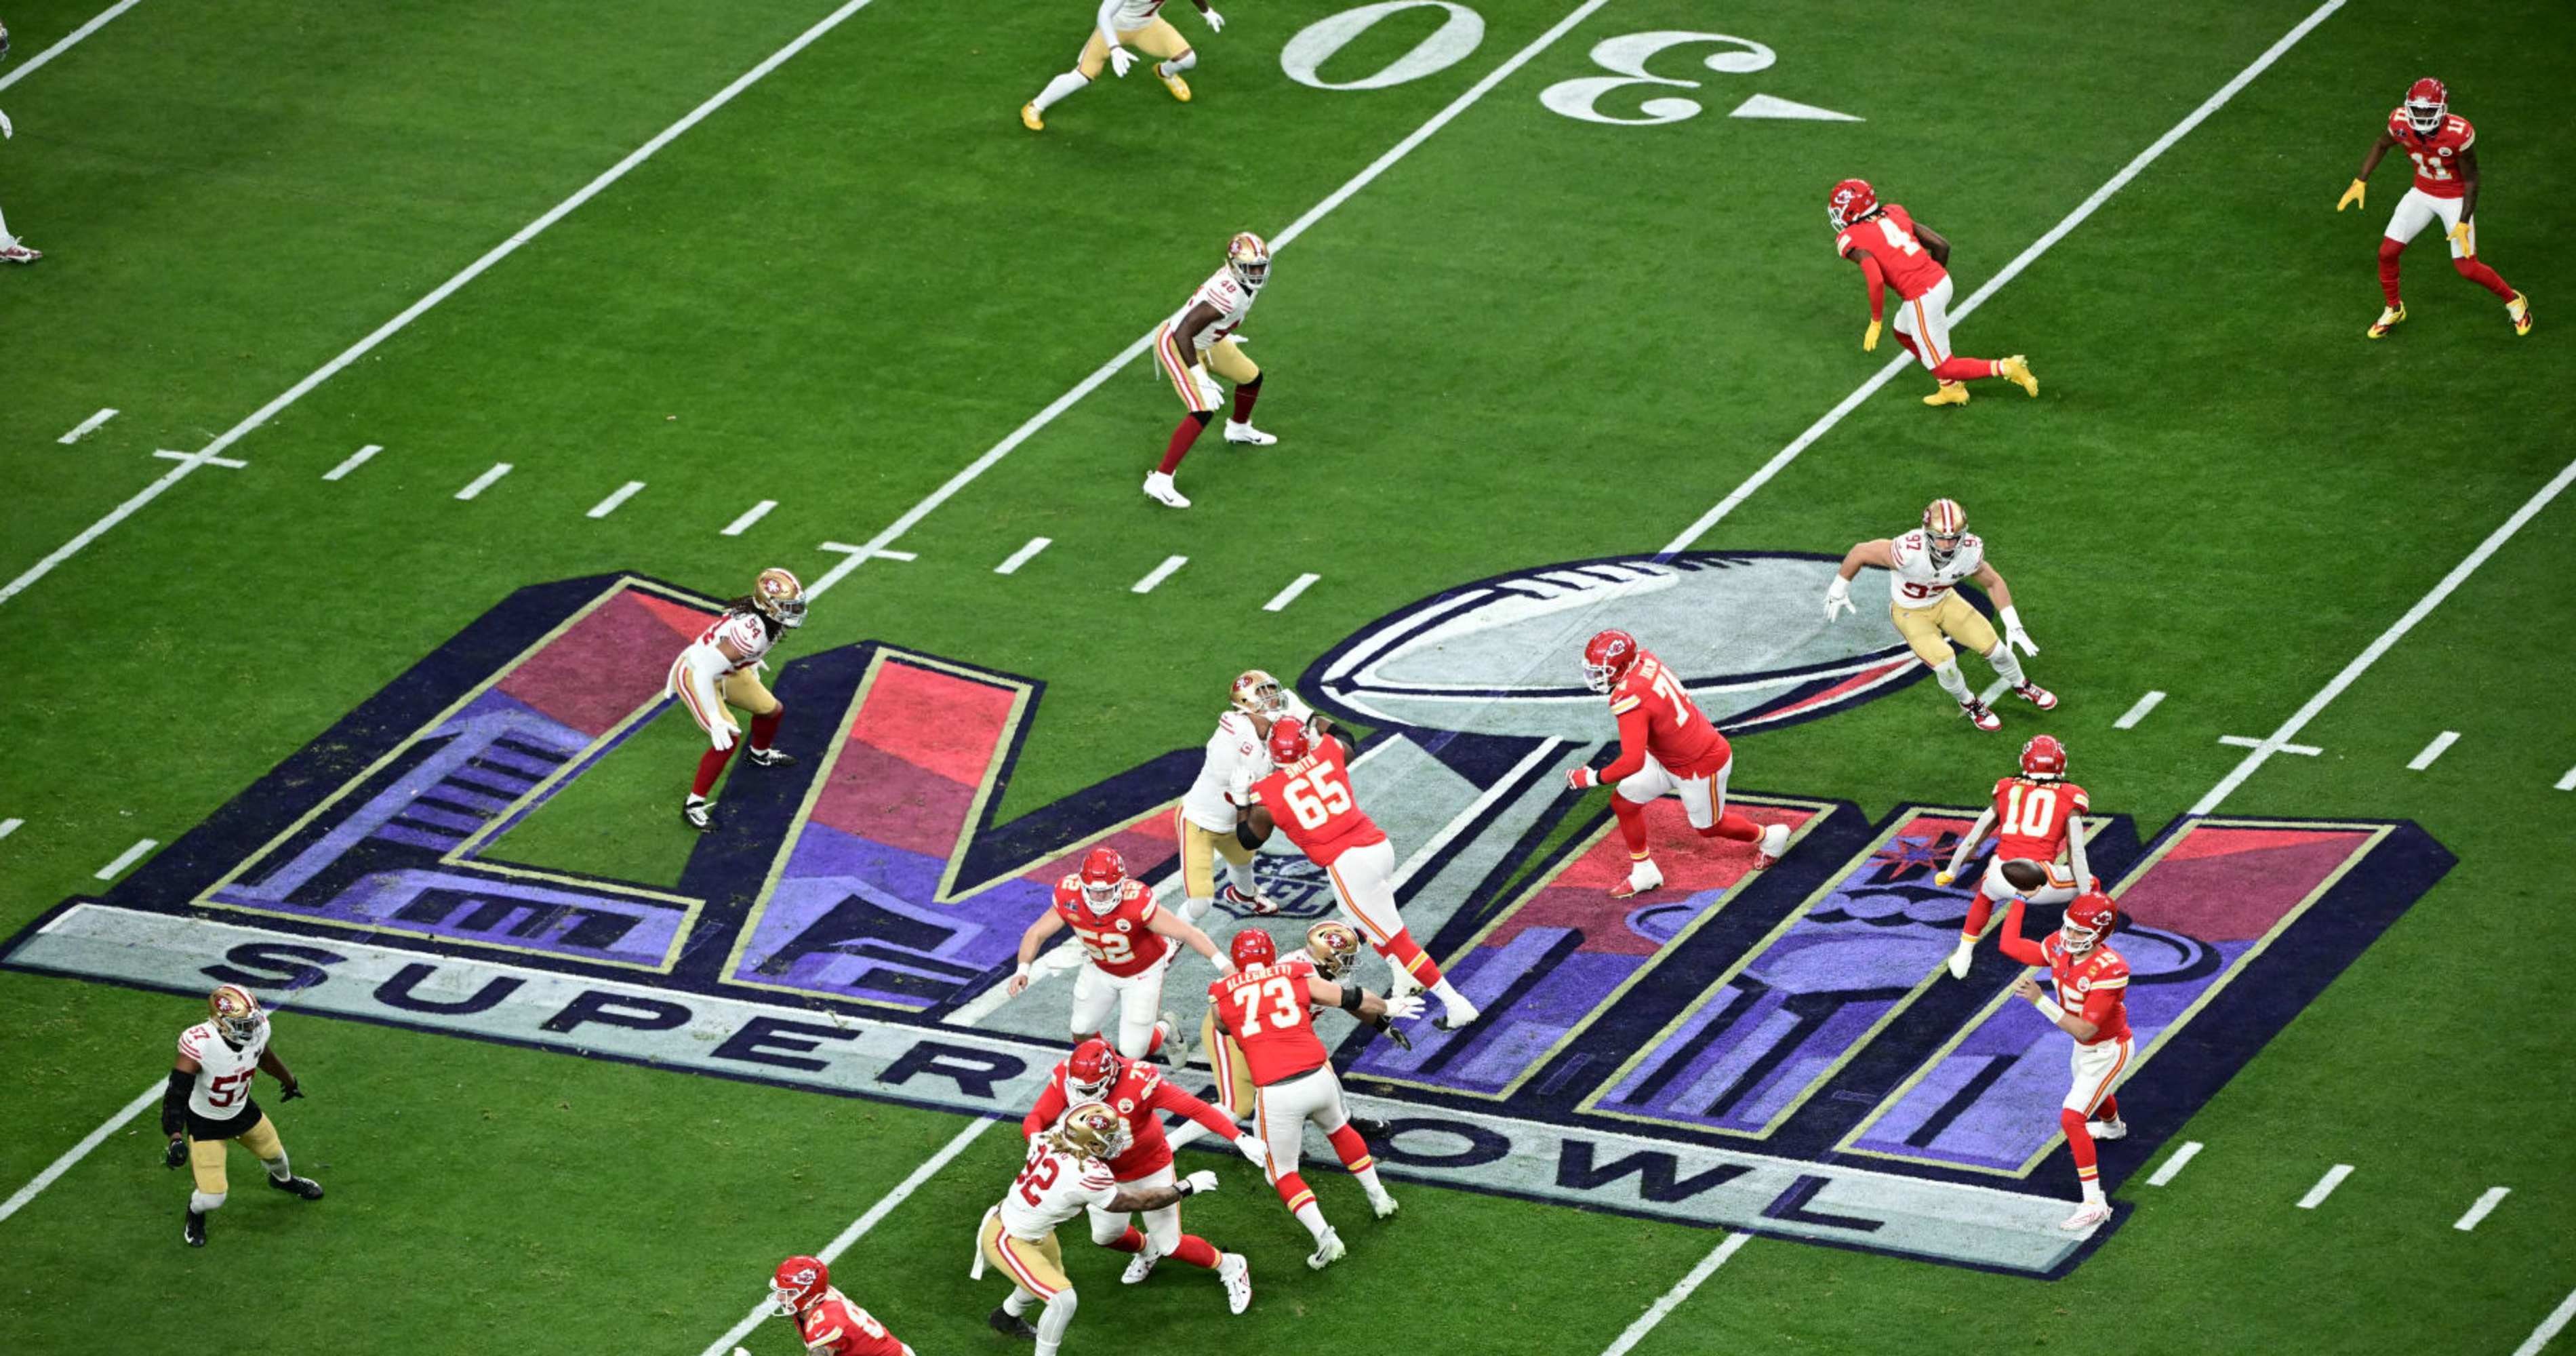 49ers vs. Chiefs NFL Super Bowl 58 Draws 123.4M Viewers; Most-Watched Telecast Ever